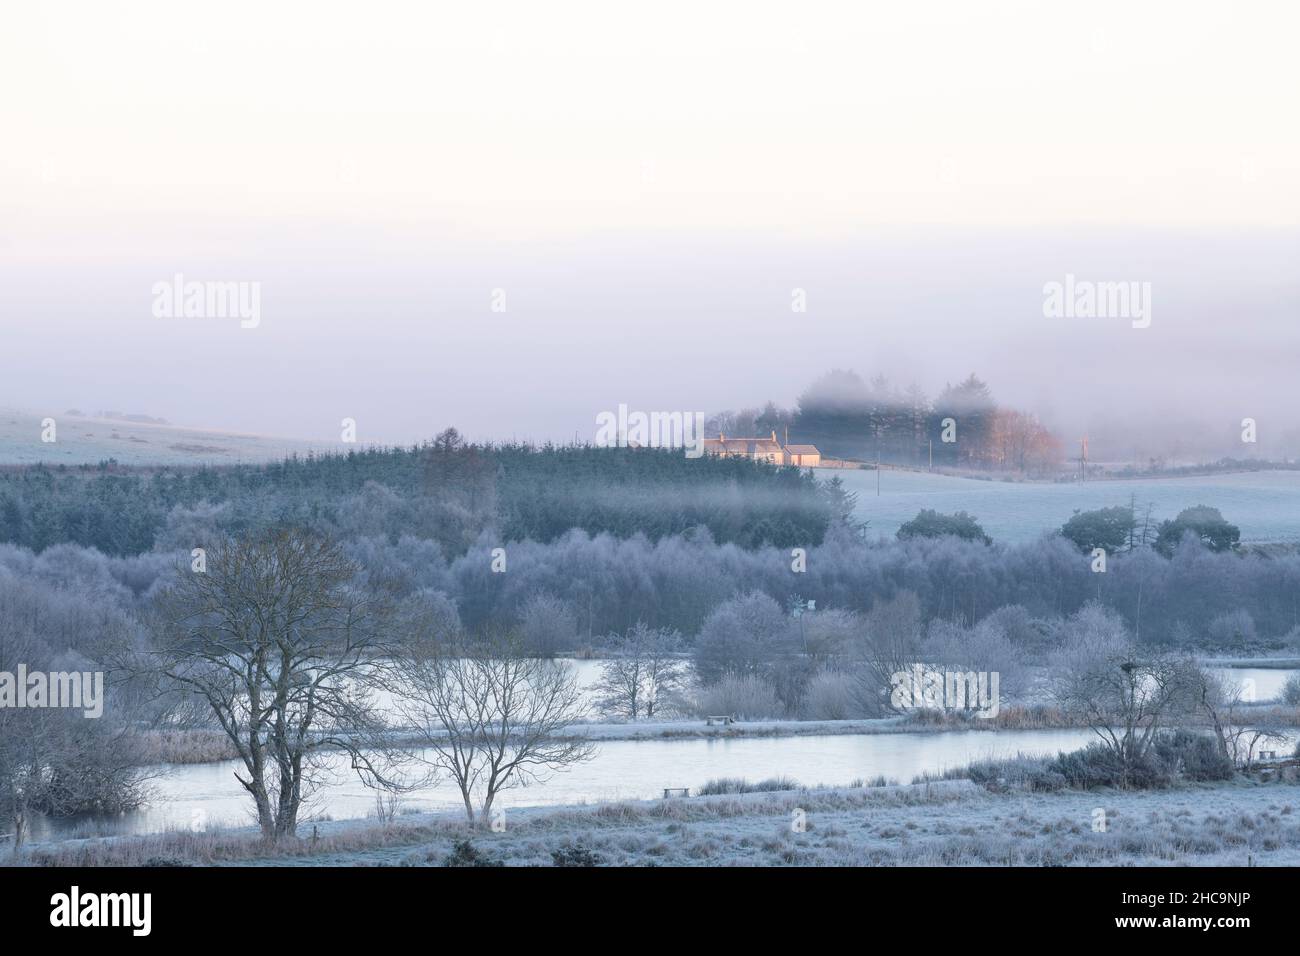 A View of the Ponds at Midmar Fishery and Surrounding Woodland on a Cold, Frosty Morning as the First Sunshine Falls on a Cottage in the Distance Stock Photo